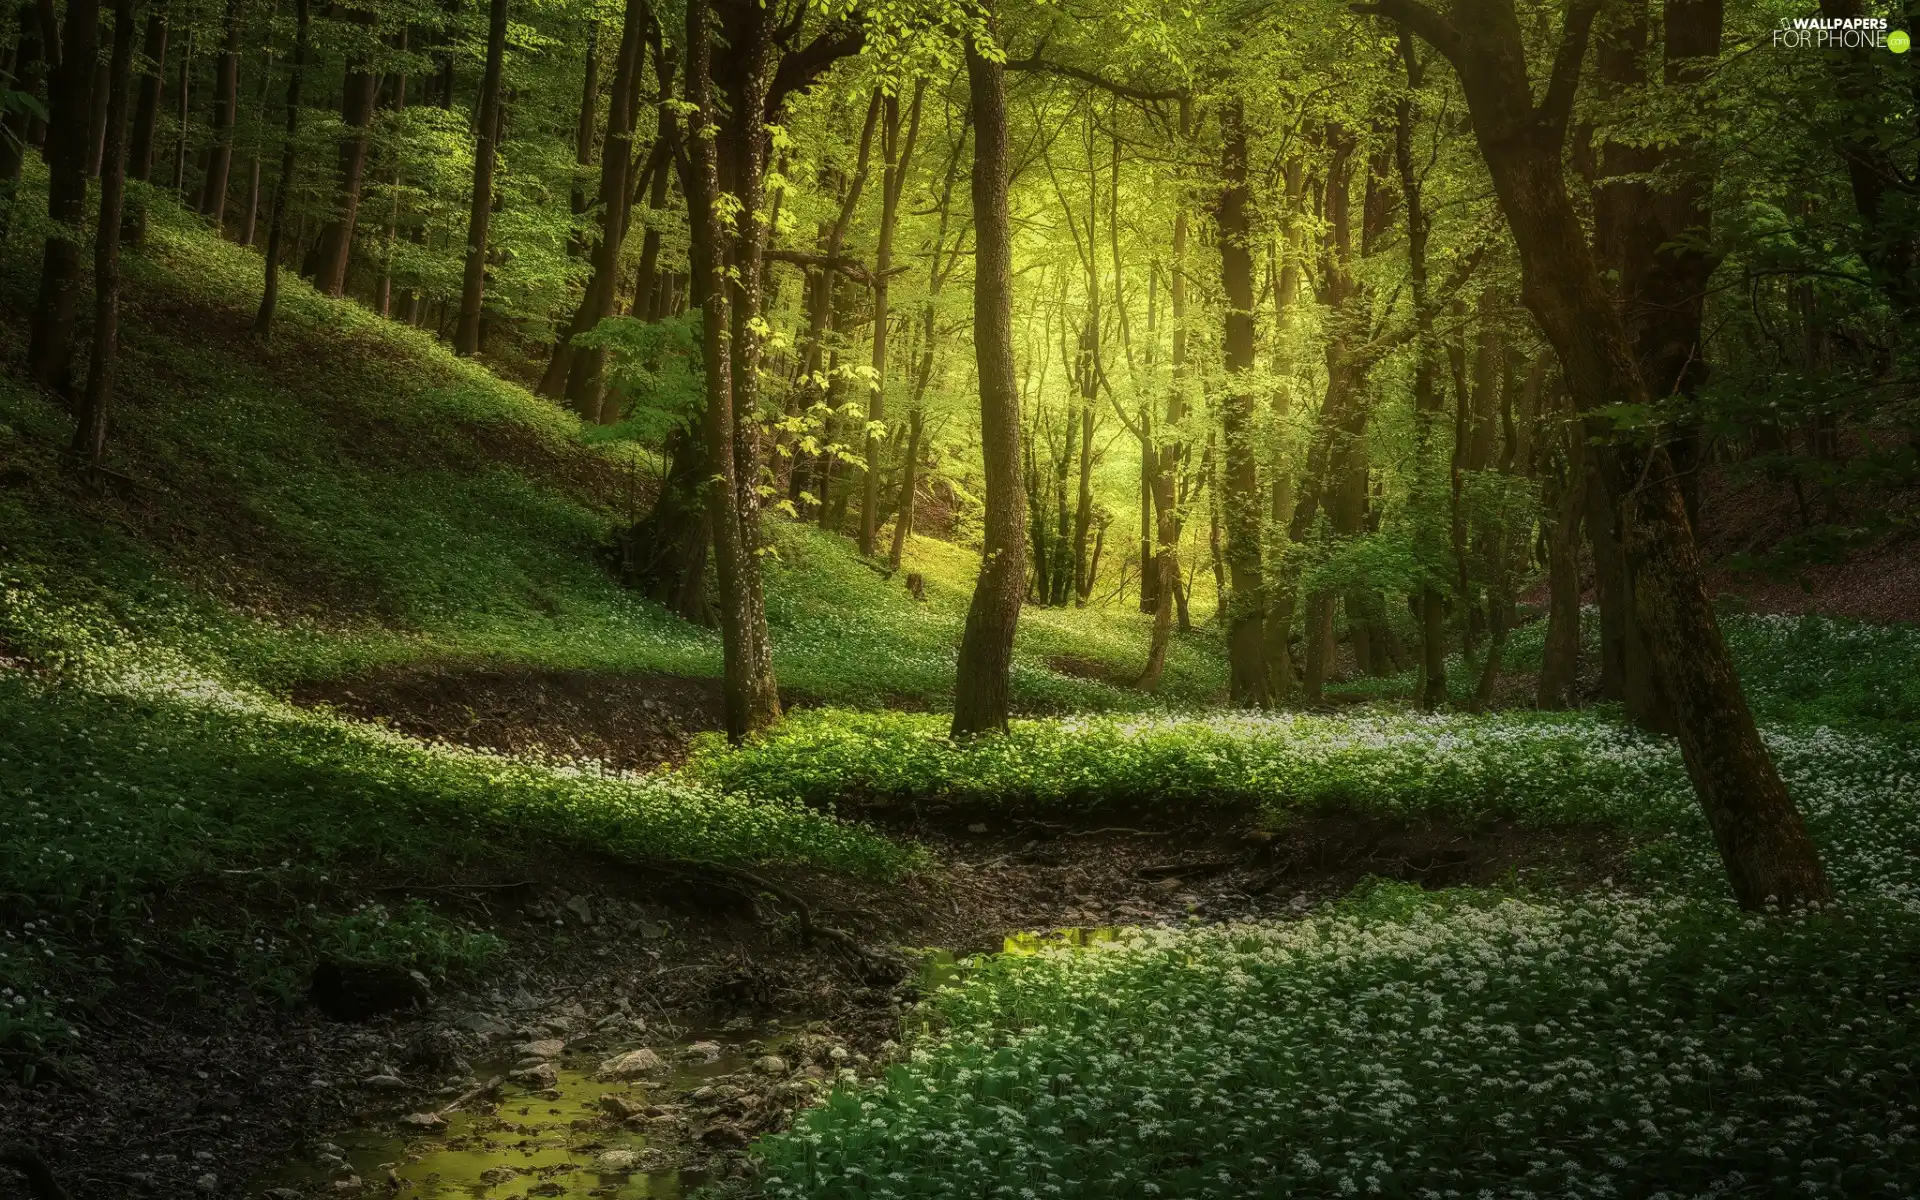 viewes, landscape, Wild Garlic, nature, Flowers, trees, forest, canyon